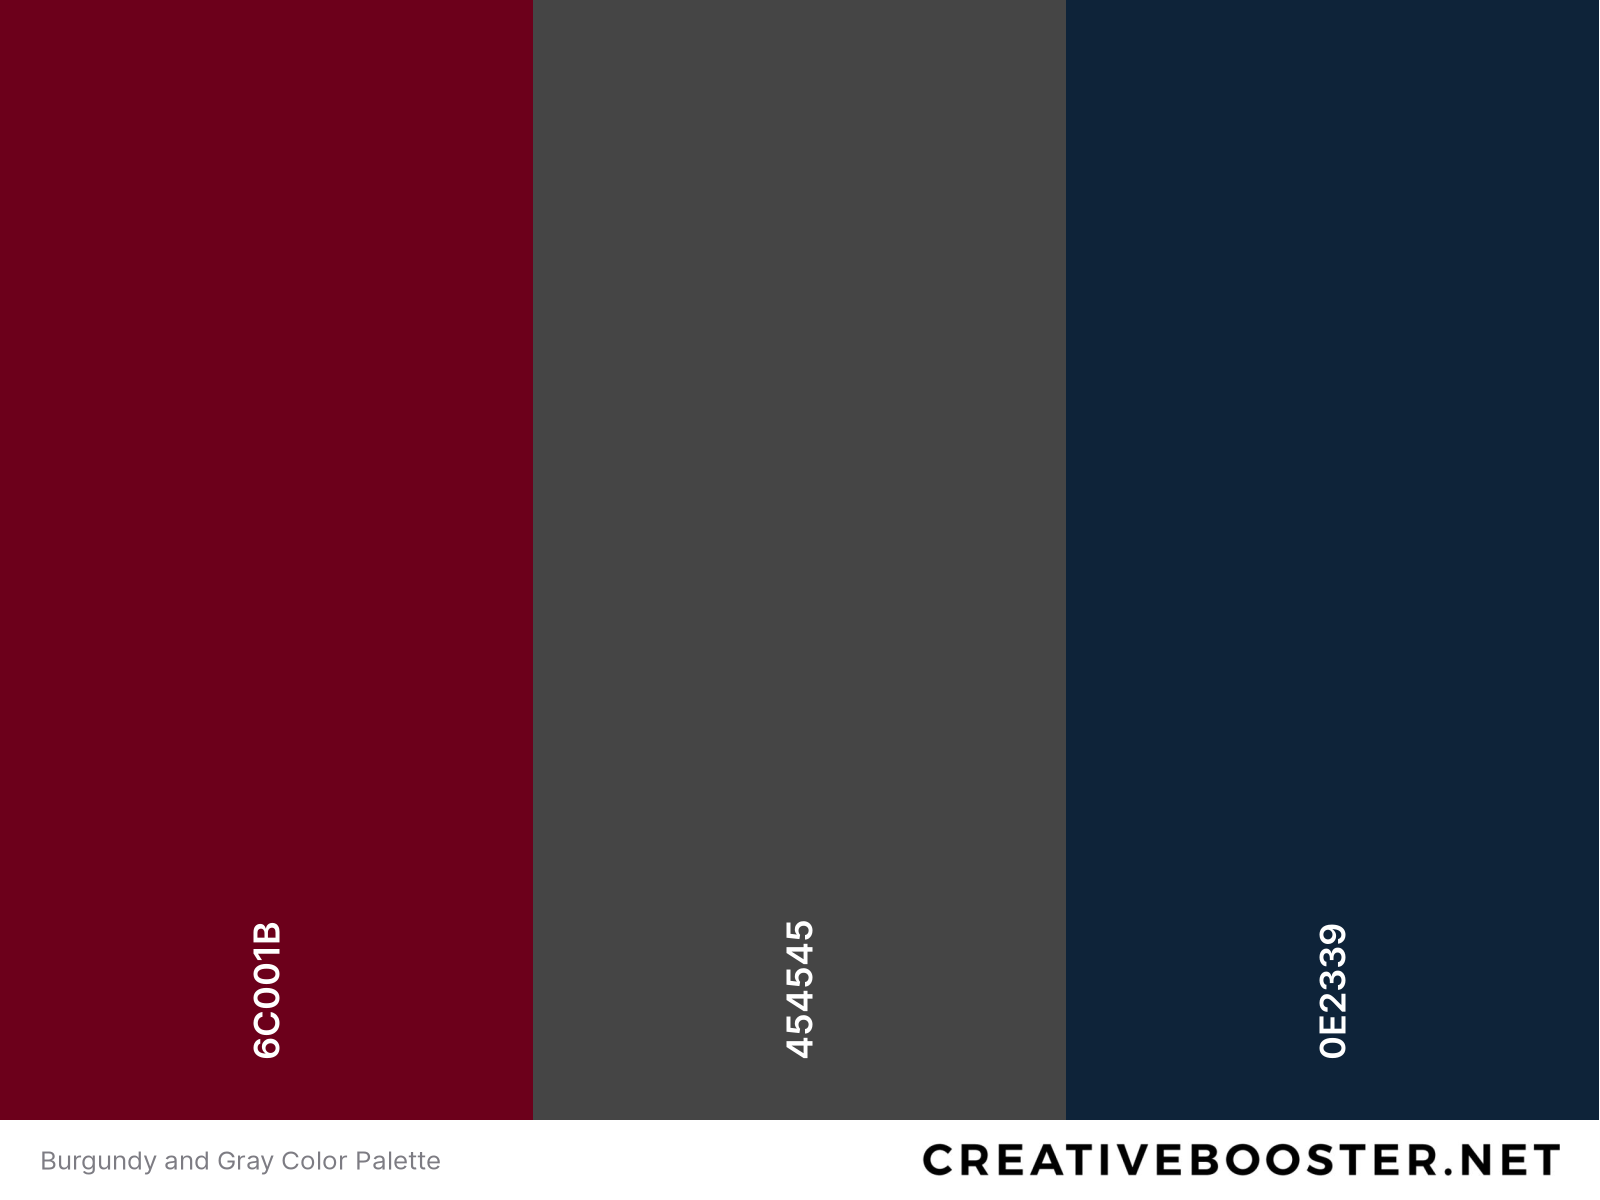 Burgundy and Gray Color Palette